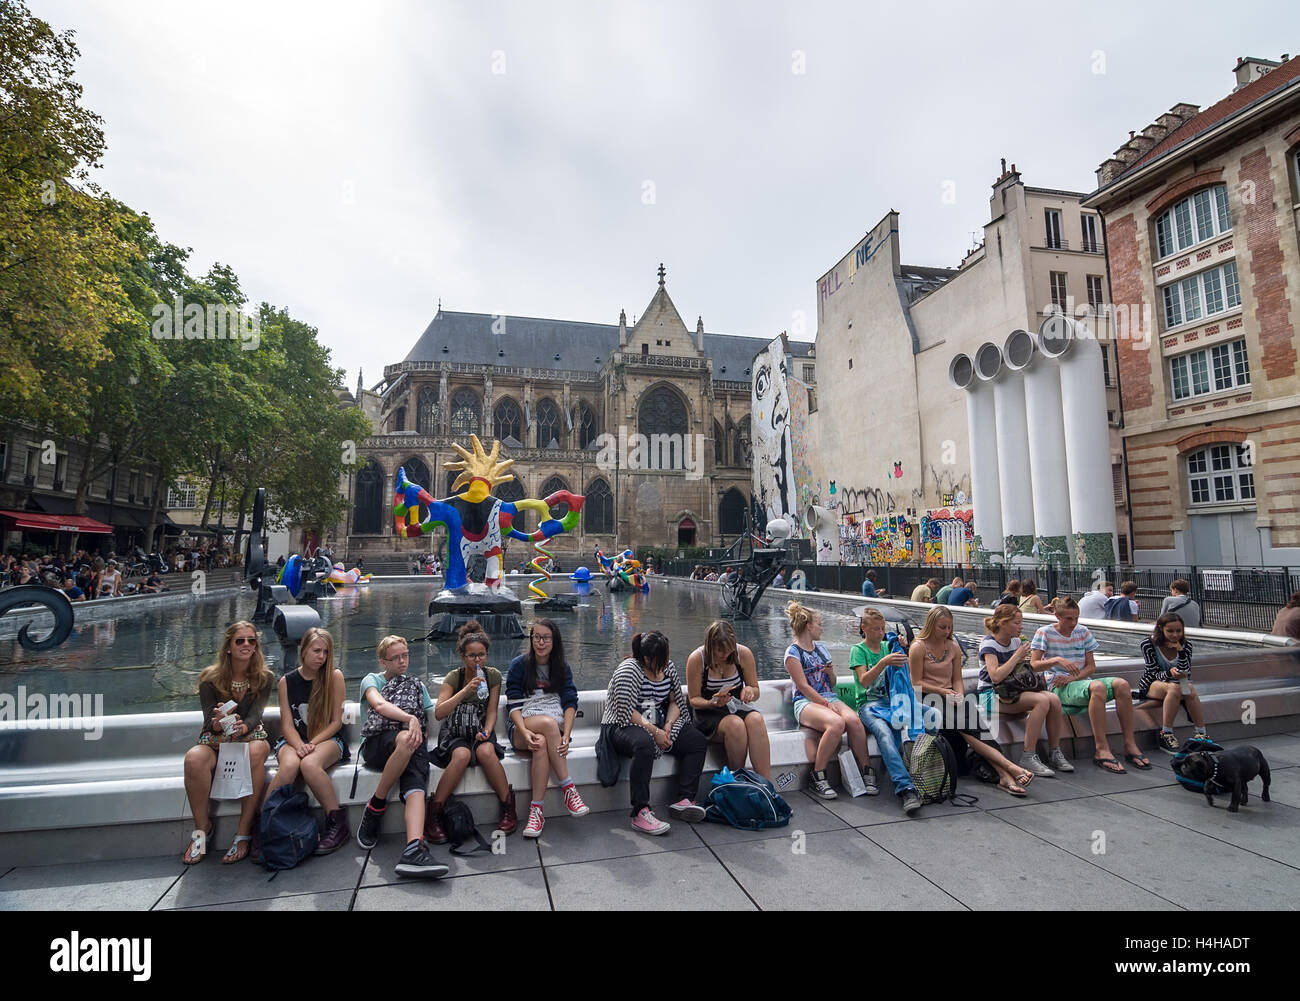 PARIS - SEPT 17, 2014: The Stravinsky Fountain is a whimsical public fountain ornamented with 16 works of sculpture. Stock Photo